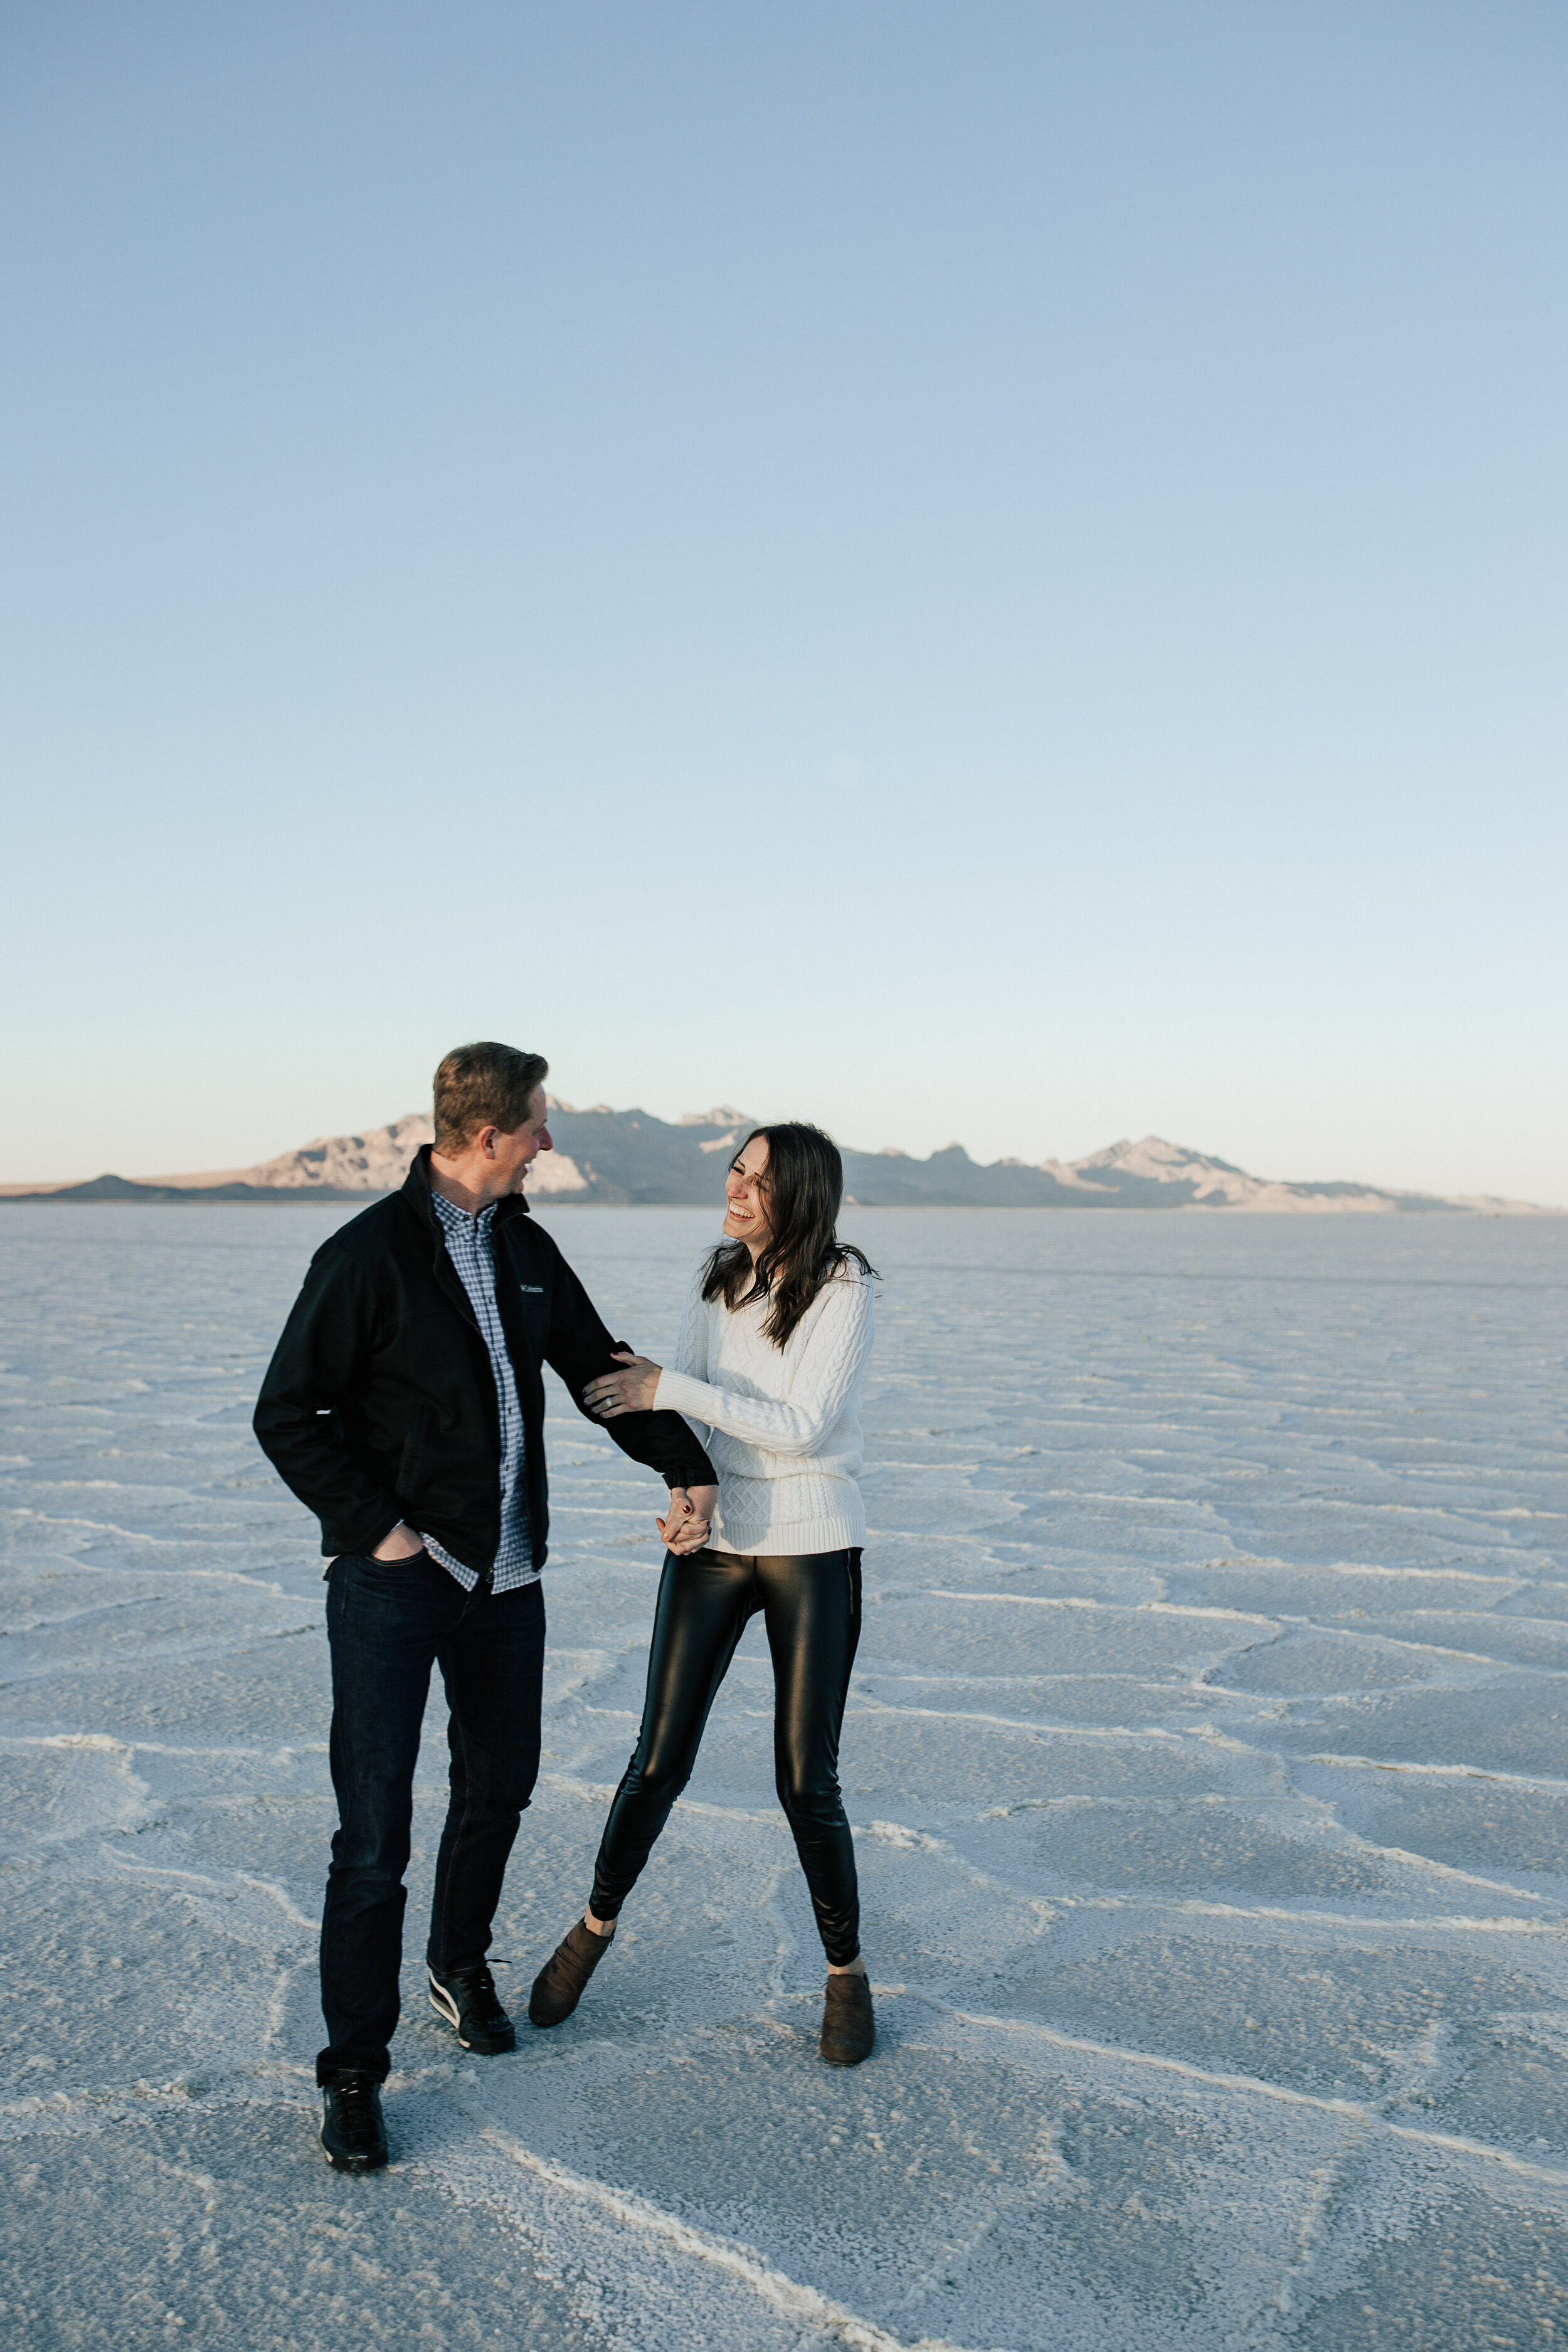  Bonneville Salt Flats couples session. Couple teases each other at the salt flats Utah. Winter couples shoot anniversary session in Utah. Adventurous couples shoot. #engagementsession #couplesession #coupleshoot #weddingphotography #elopement  